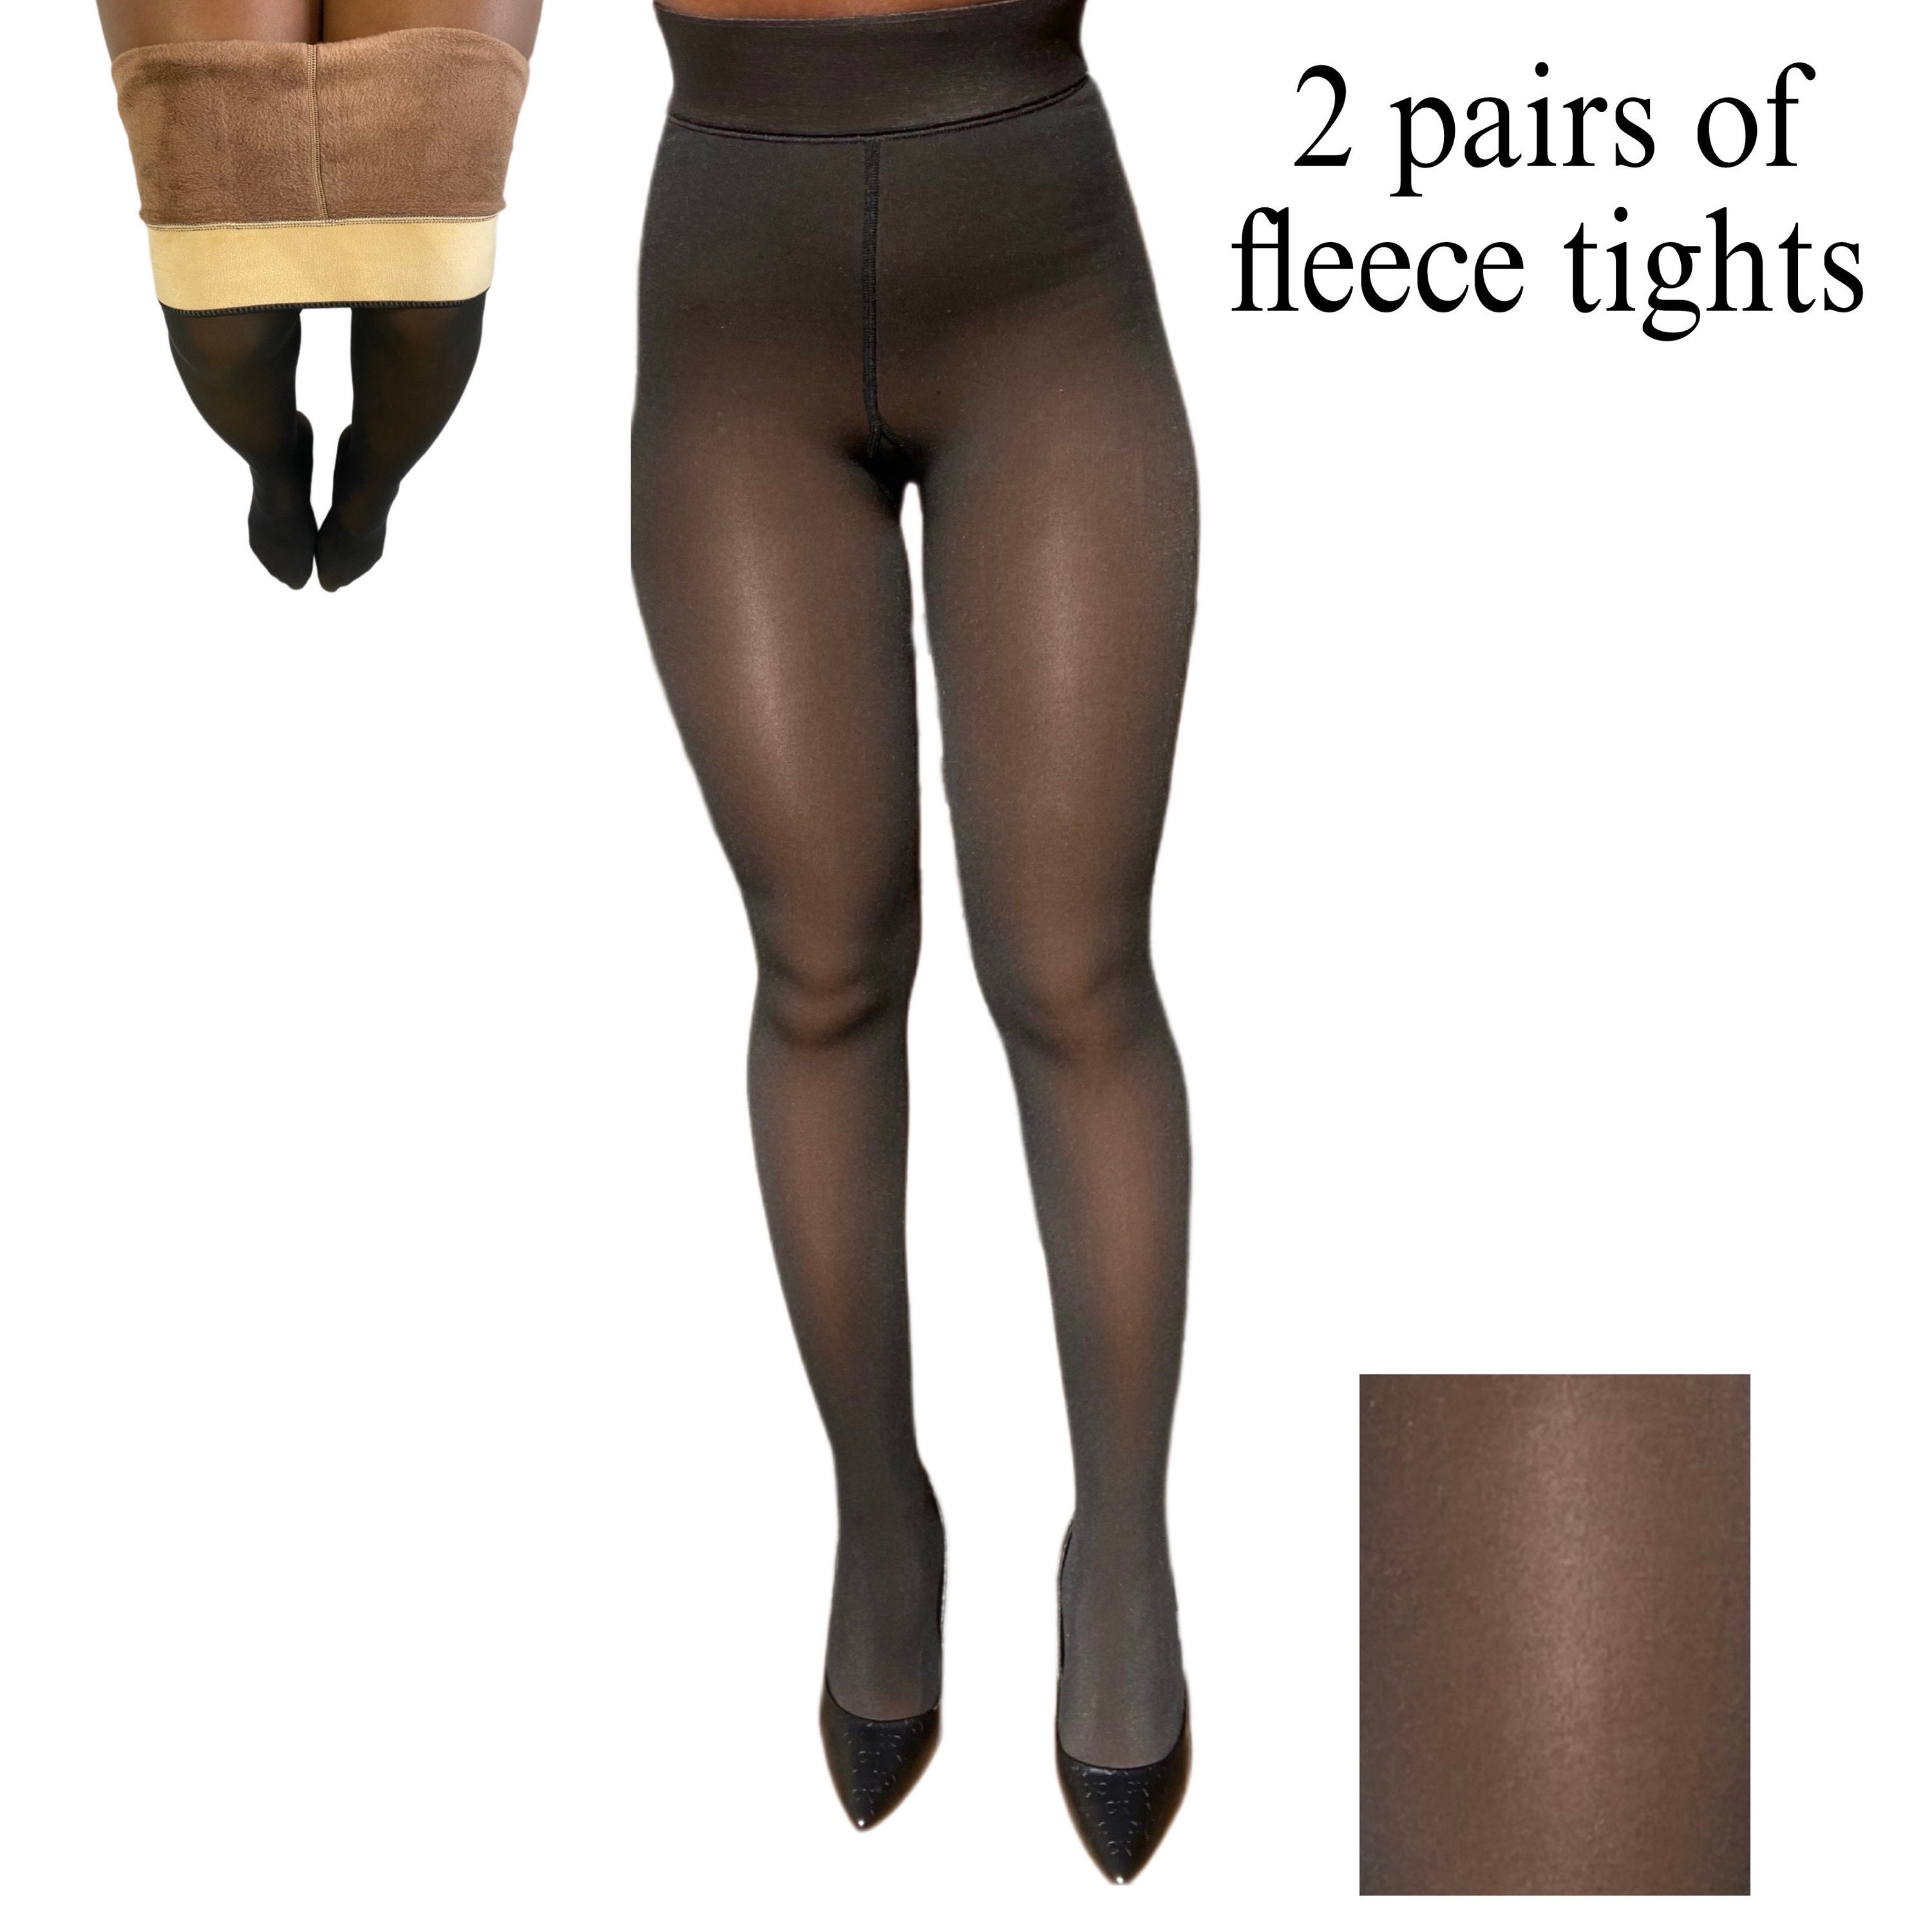  Womens Fleece Lined Tights Fake Translucent Pantyhose  Thermal Opaque High Waisted Warm Legging Pants Footed Sheer Tights 300g  Fake Translucent Black L/XL